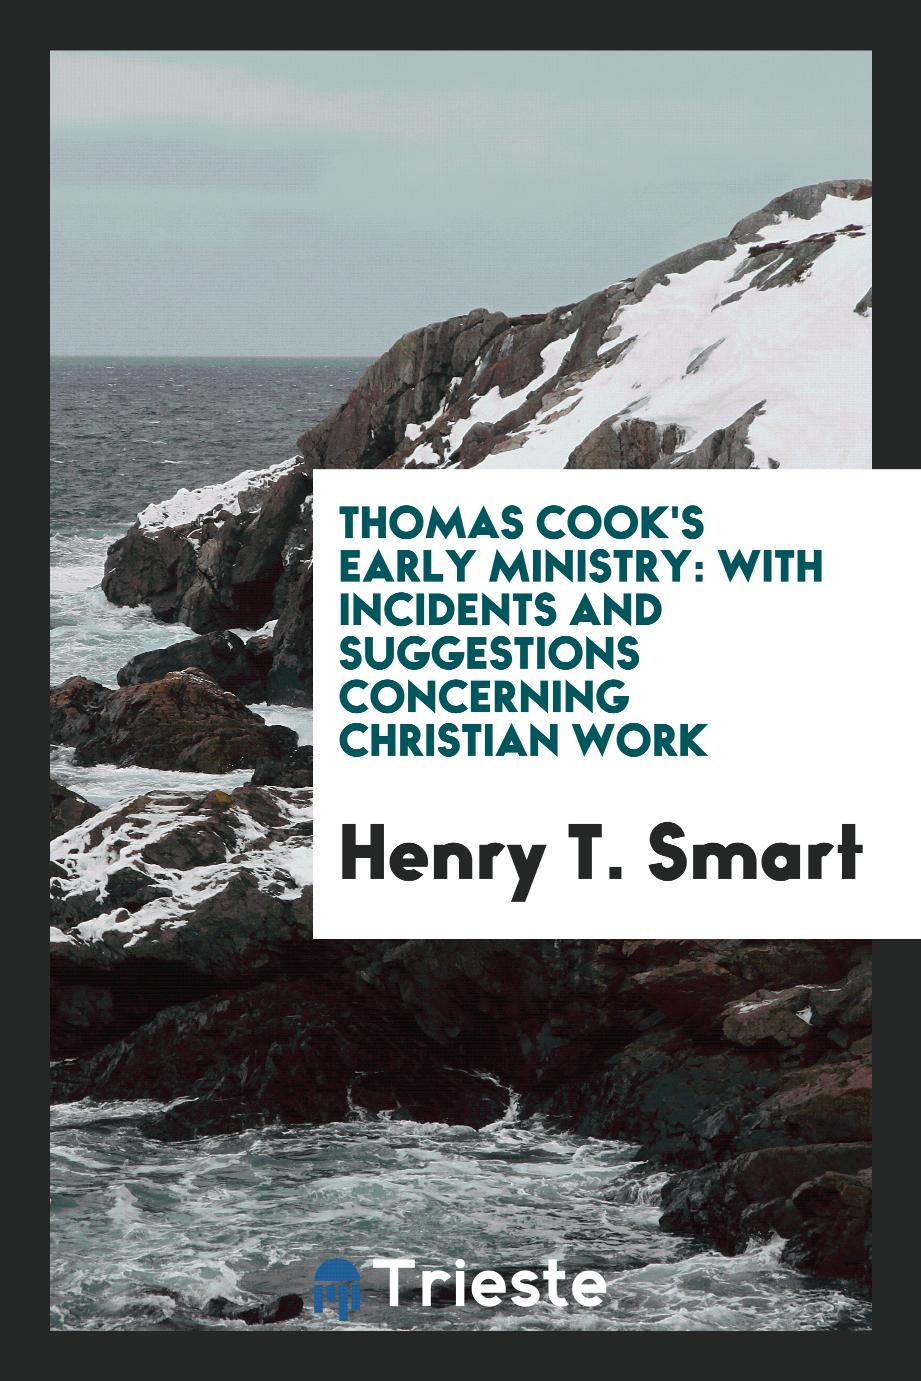 Thomas Cook's early ministry: with incidents and suggestions concerning Christian work